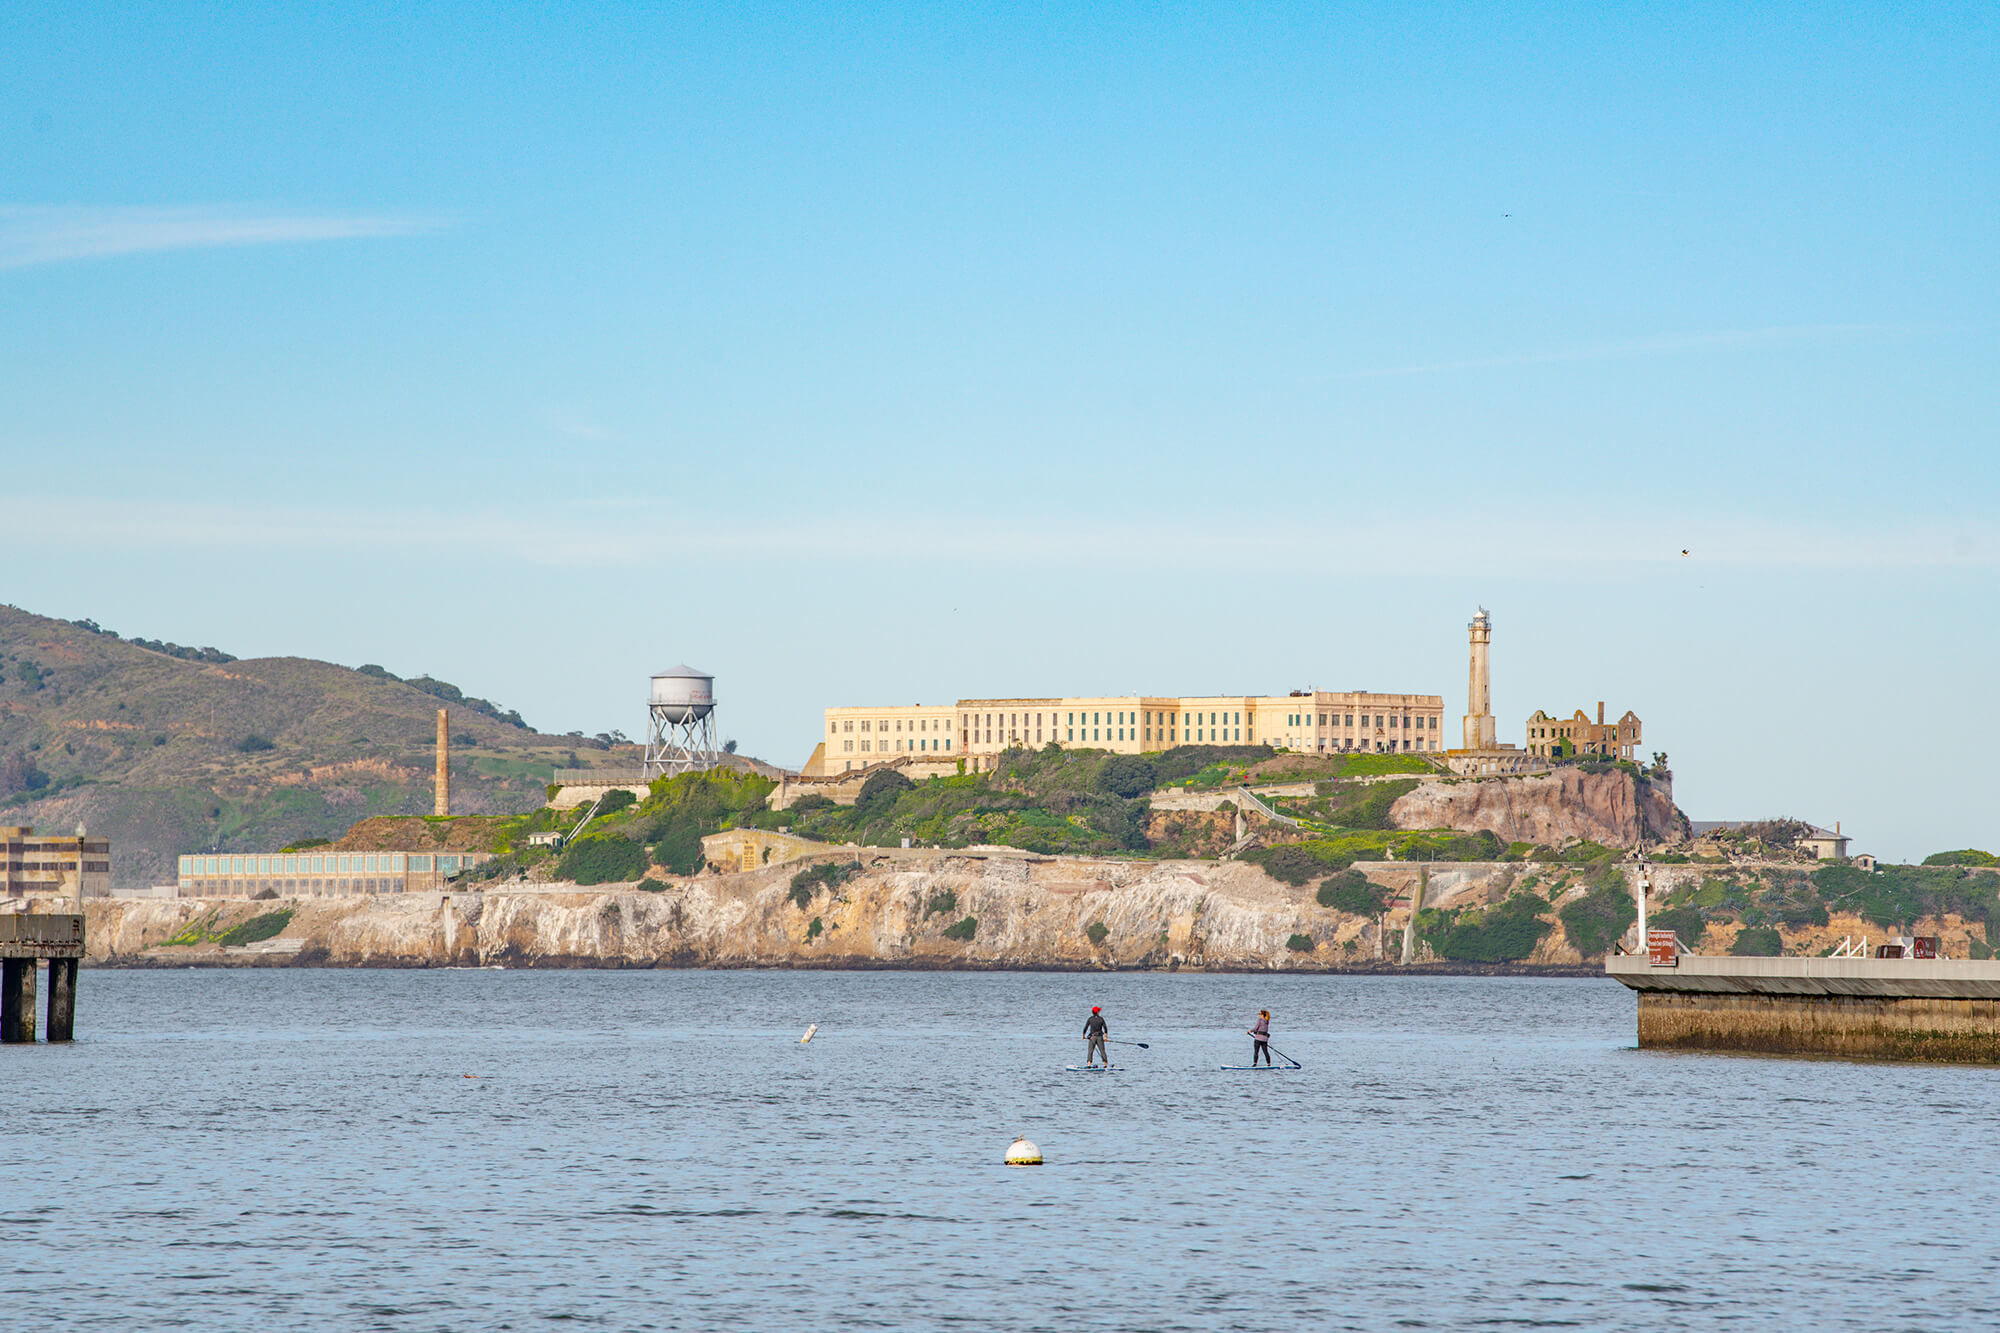 2 Paddle Boarders With Alcatraz Prison In The Background